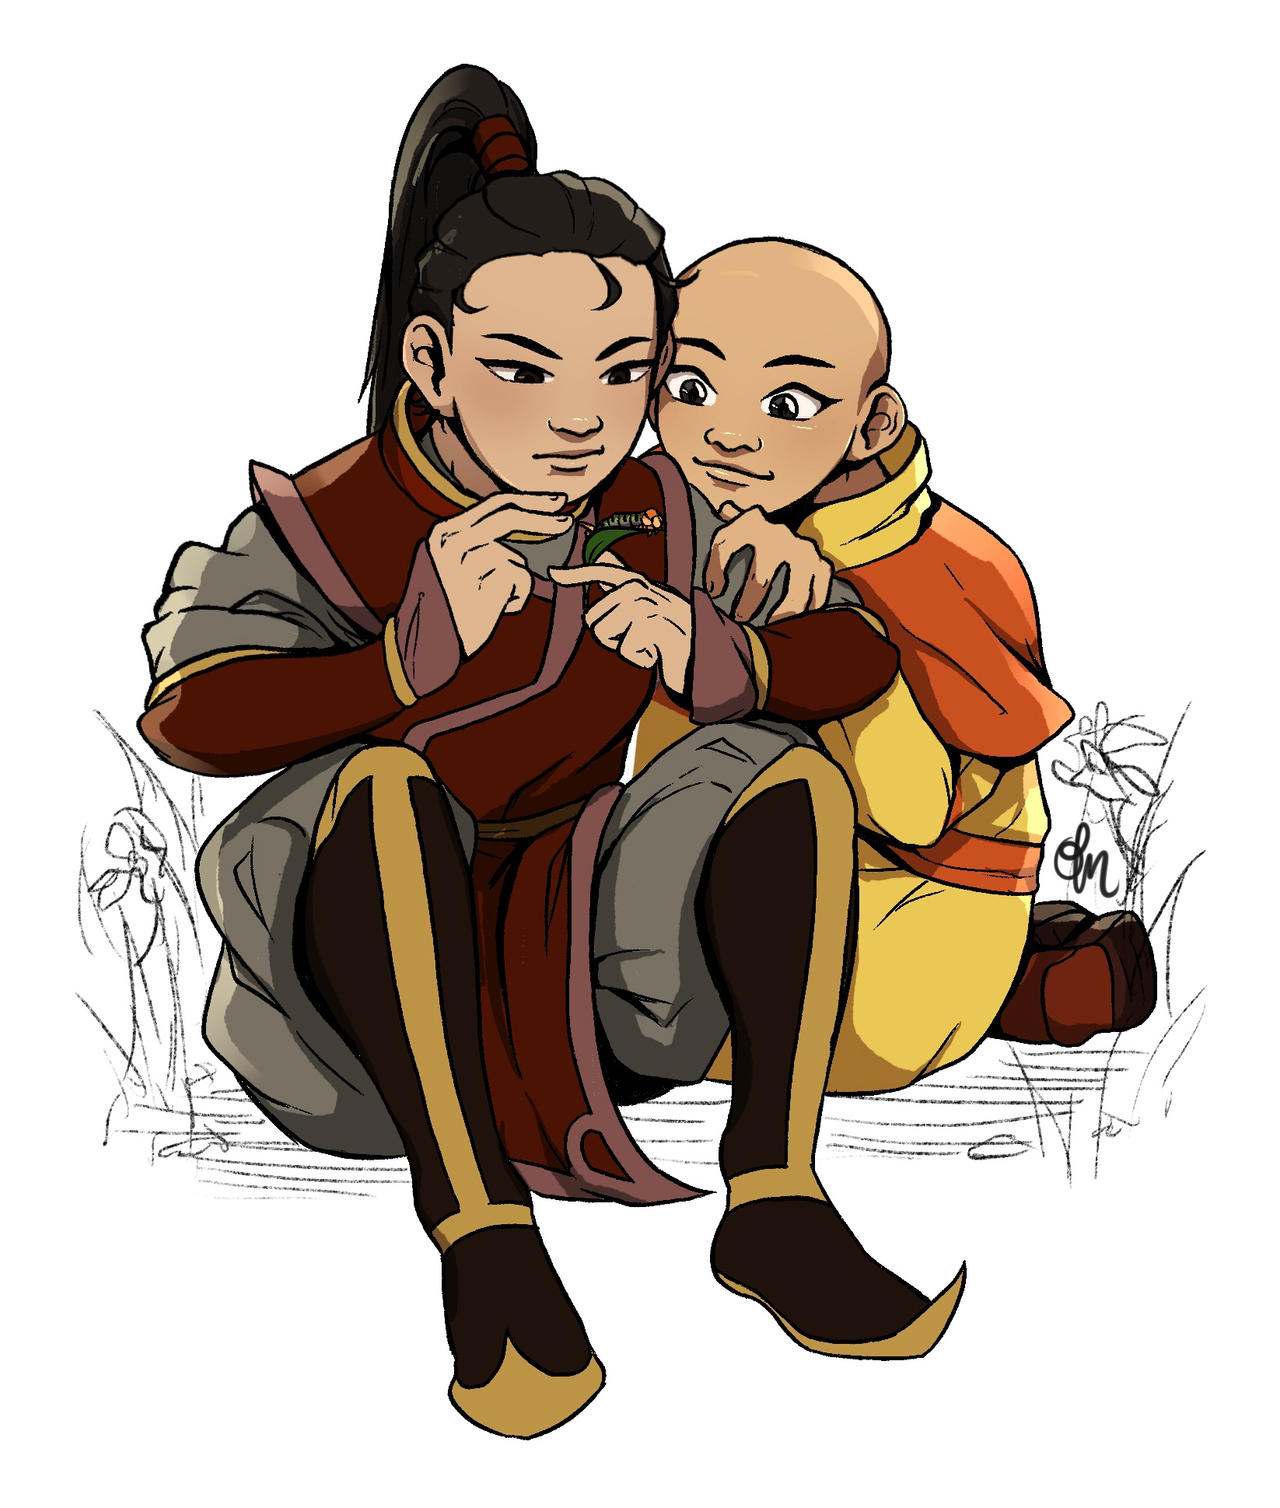 Zuko and Aang by aucatgirl on DeviantArt